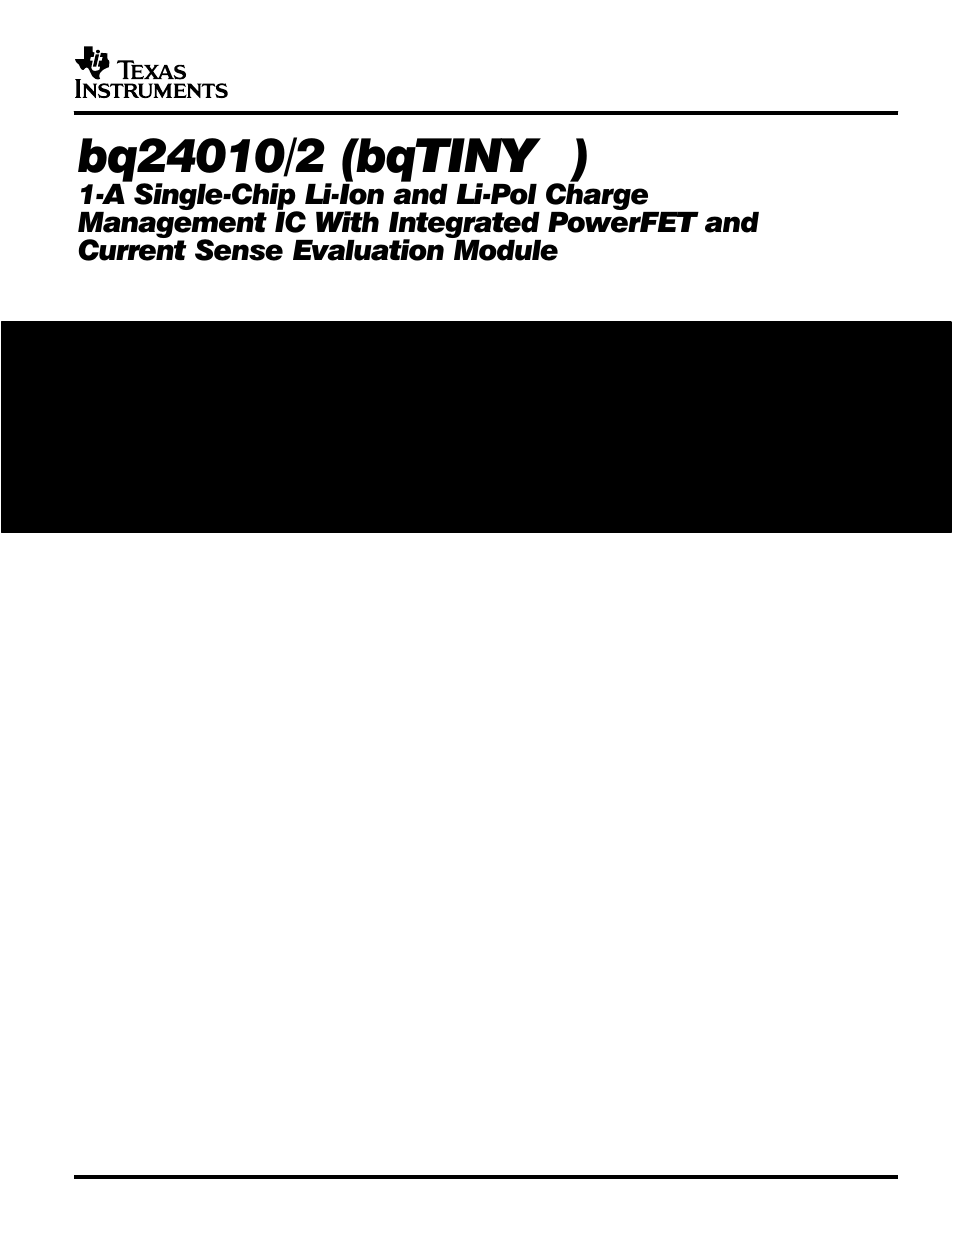 Texas Instruments bq24010/2 User Manual | 18 pages